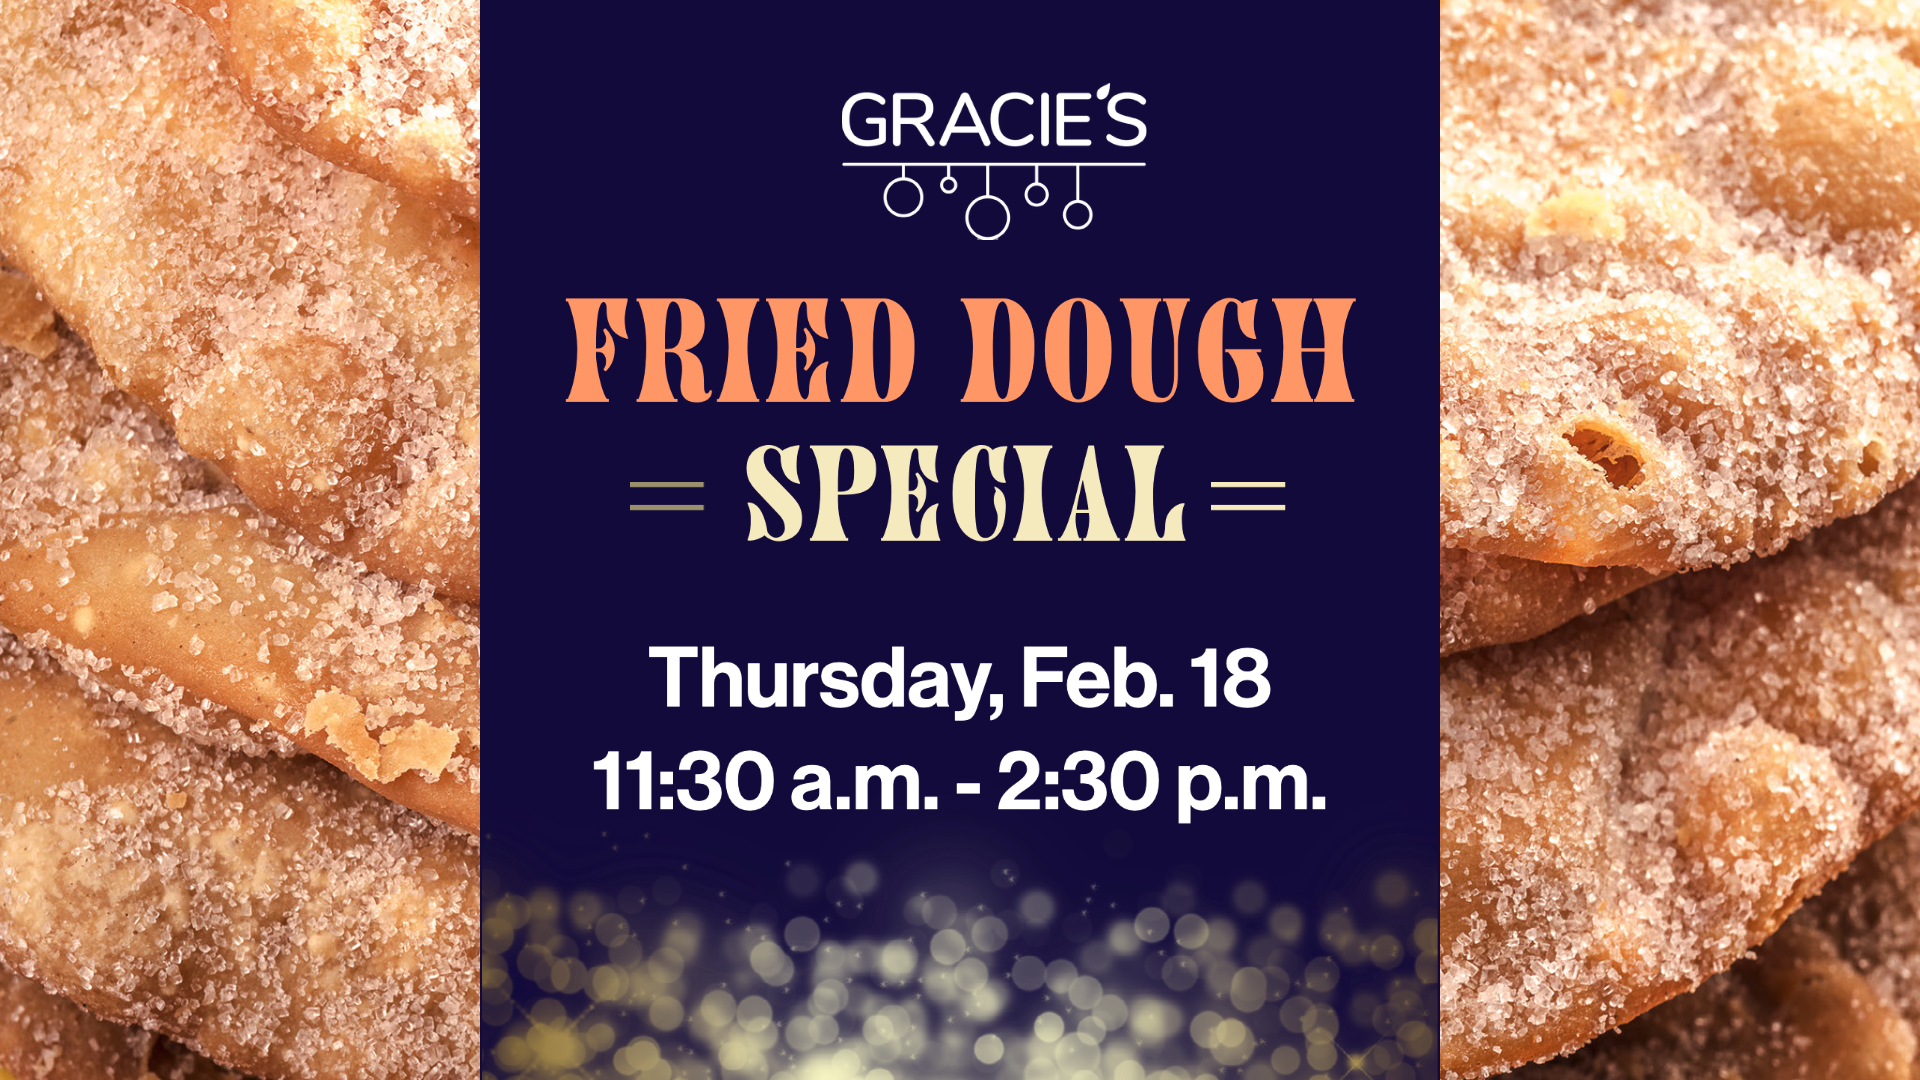 fried dough image with a blue banner over top and "fried dough special"